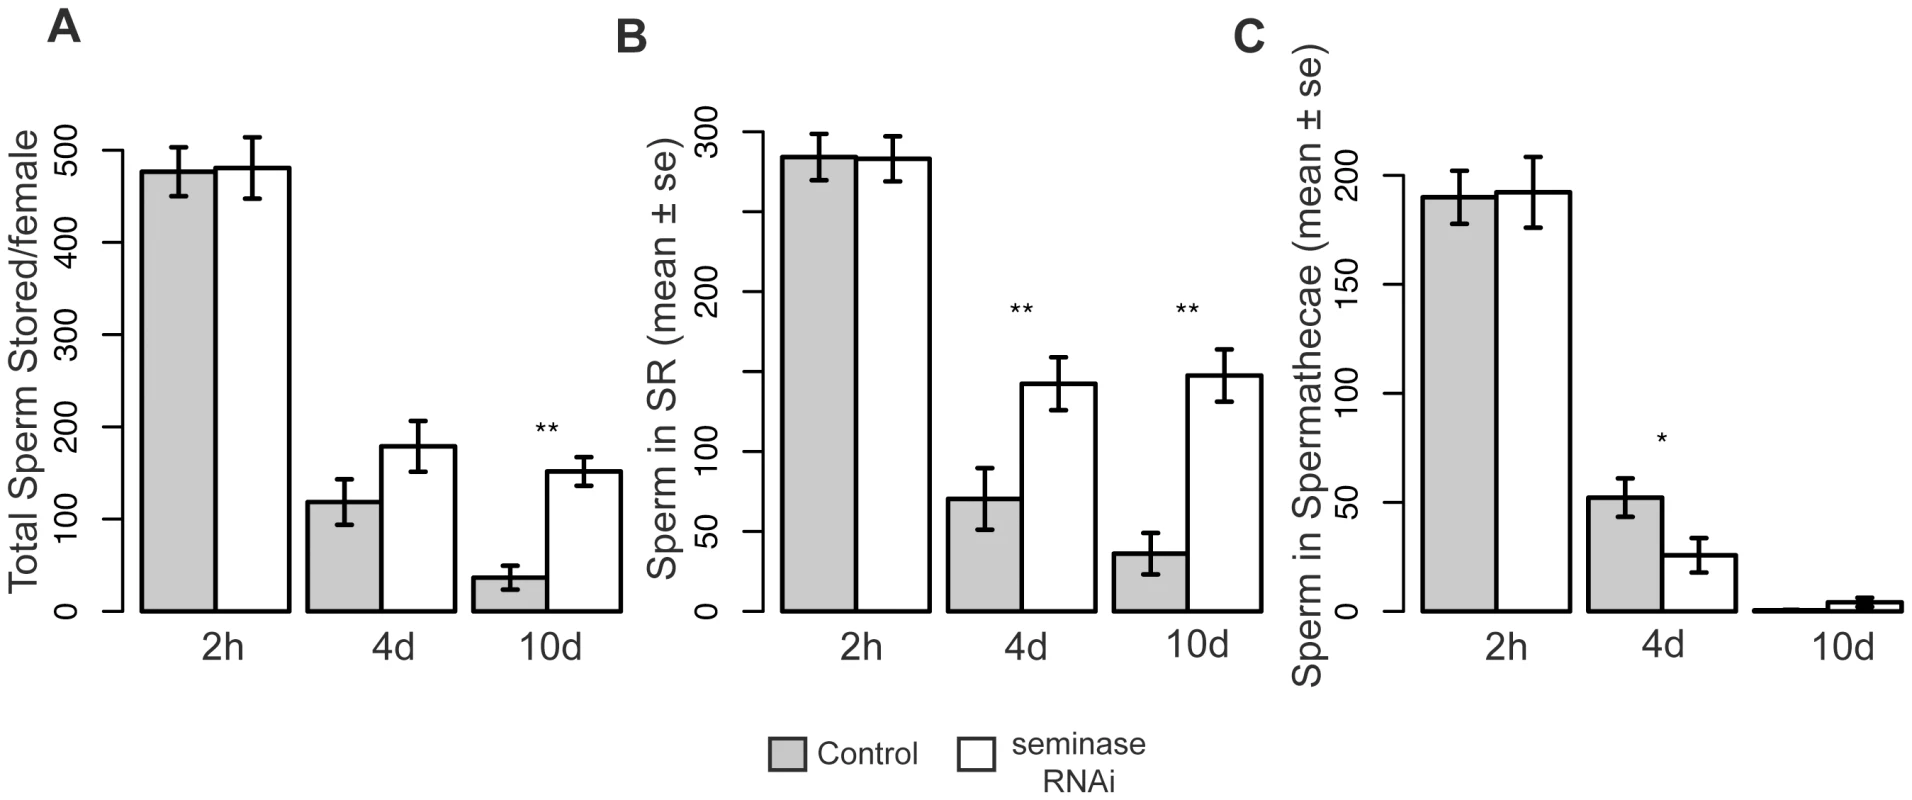 Females mated to seminase knockdown males retain more sperm 4 and 10 days after mating.